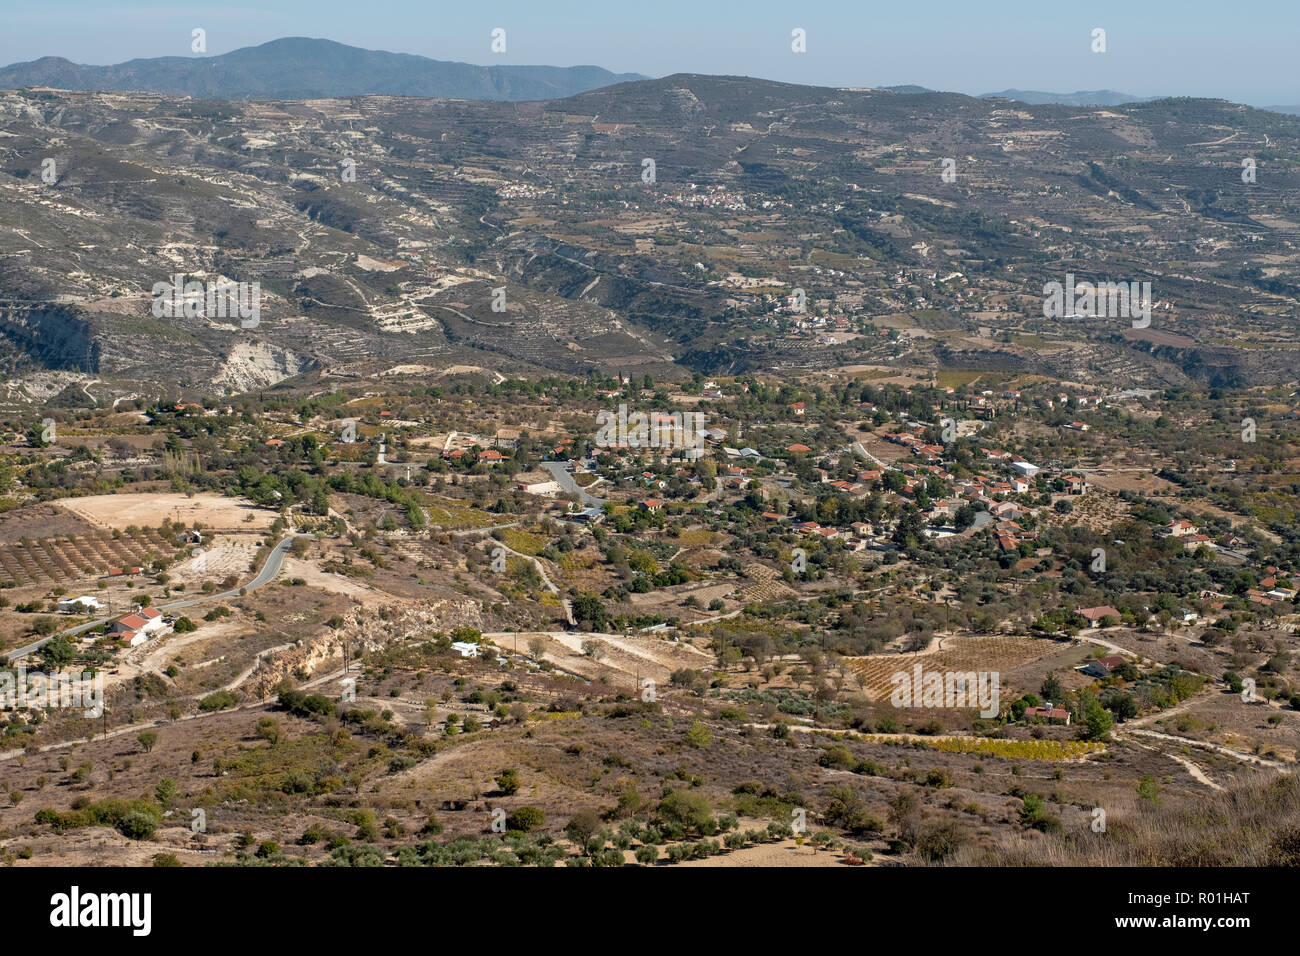 View of the Troodos foothills and mountain range, Cyprus. Stock Photo